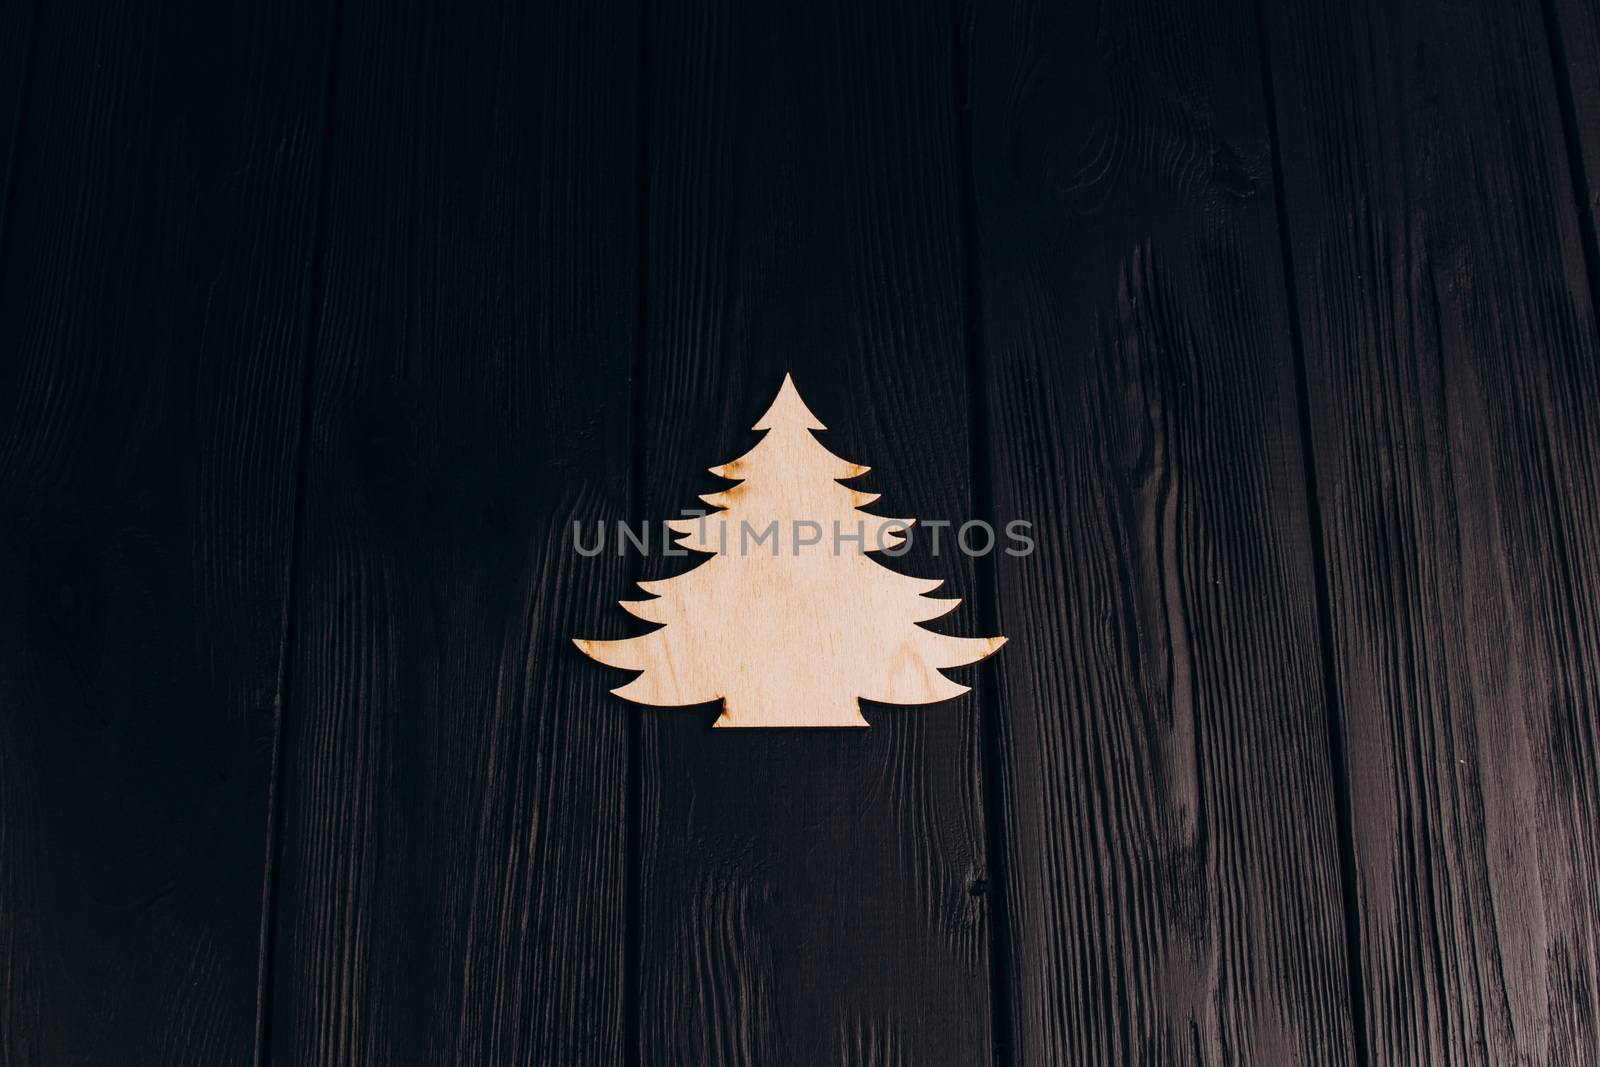 New Year composition with pine tree from plywood. Christmas background for presentation on wooden background holiday